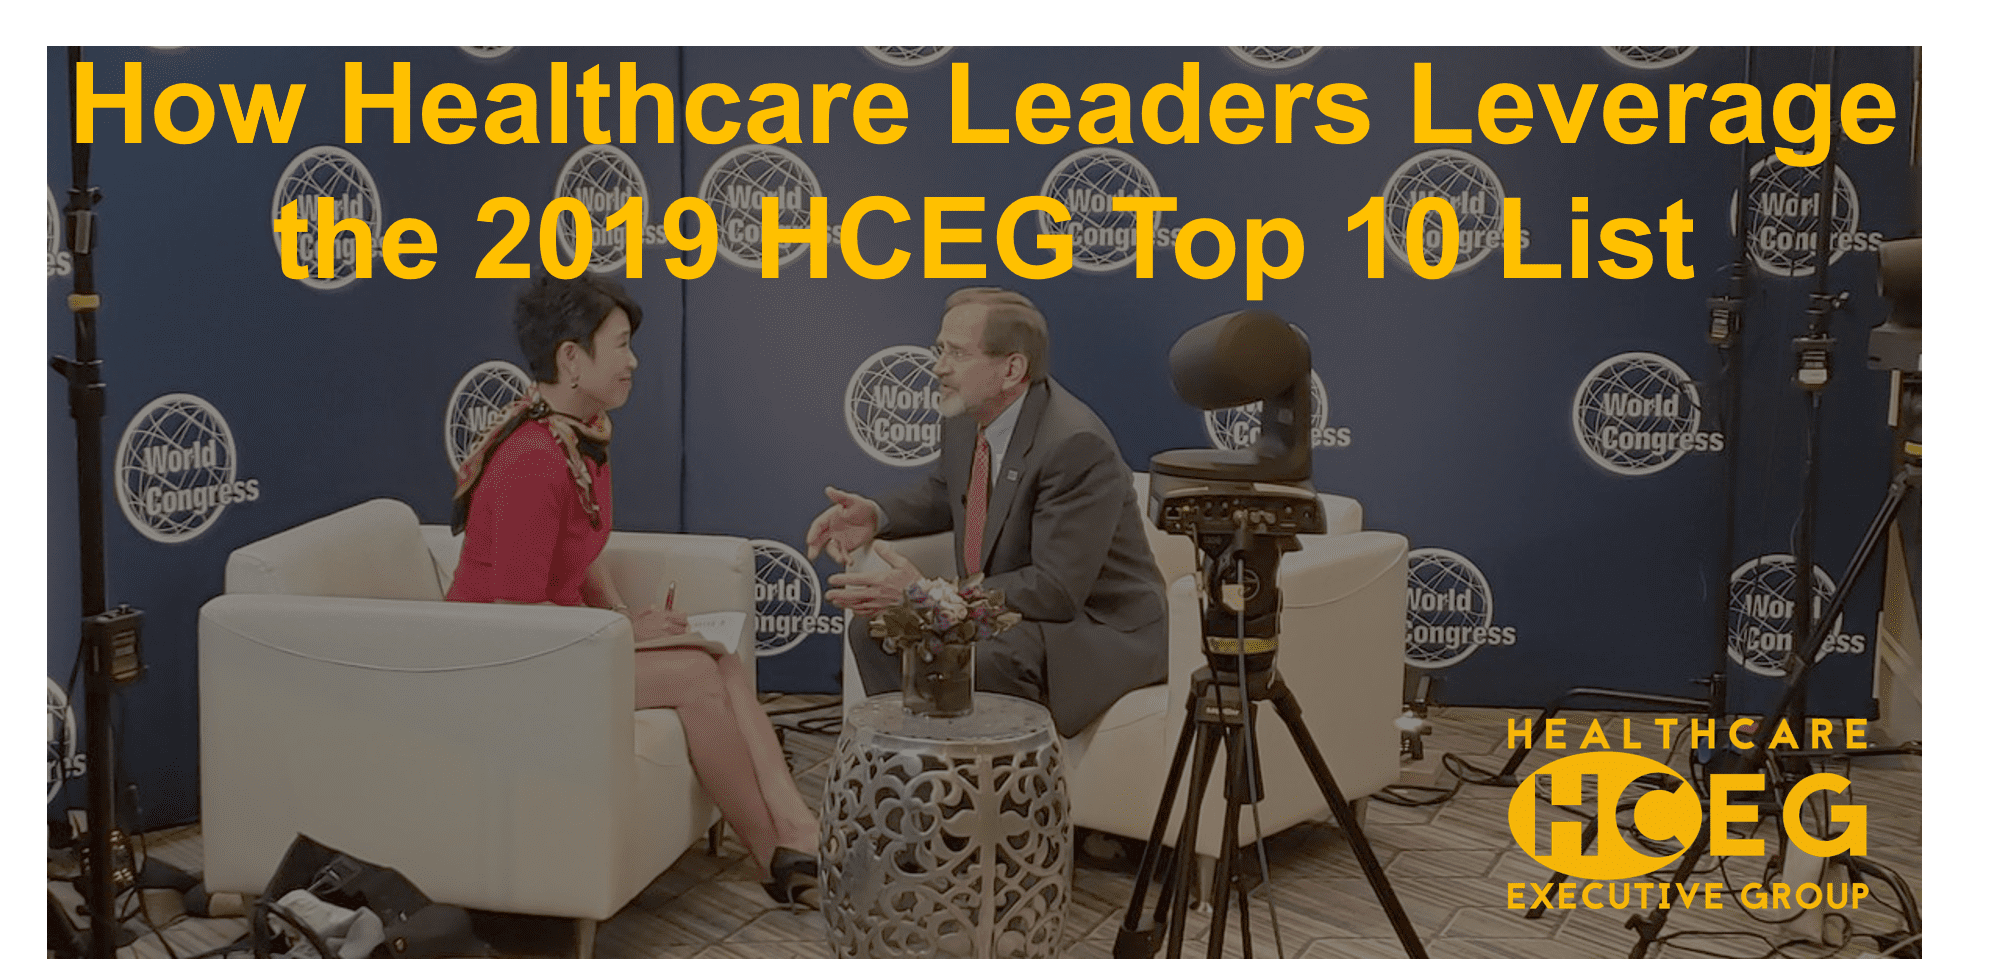 How Healthcare Leaders Leverage the 2019 HCEG Top 10 List